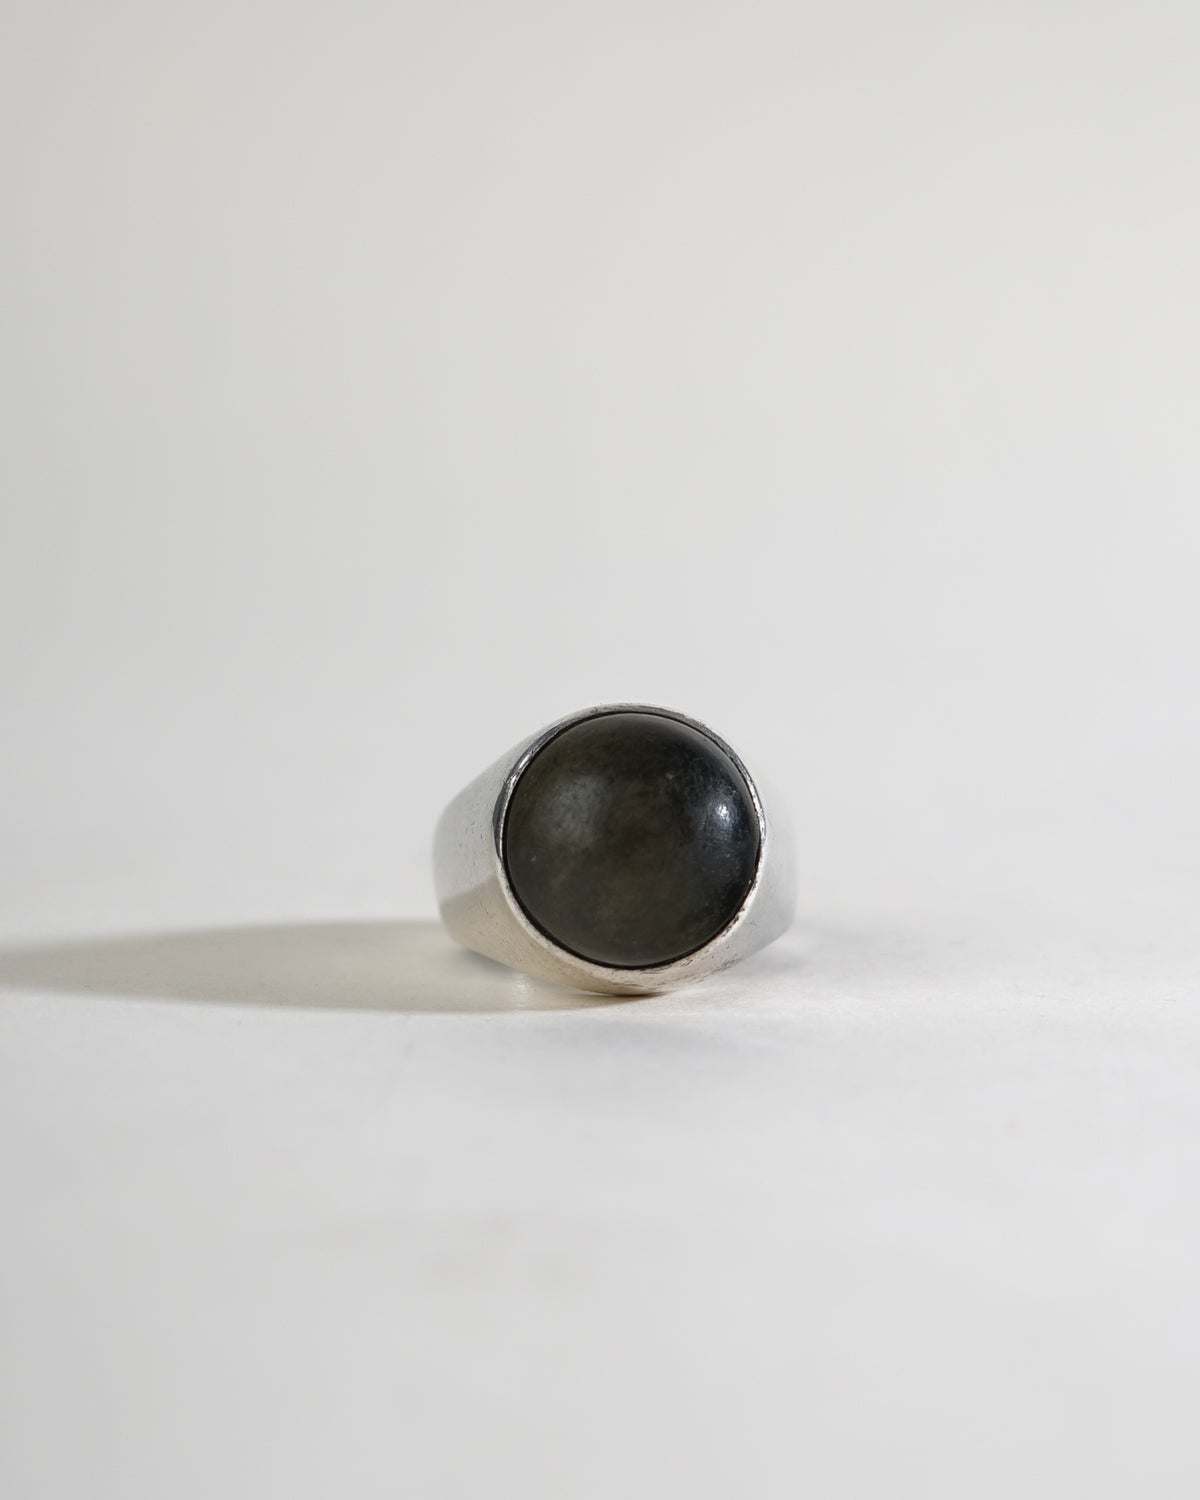 Silver Ring w/ Stone